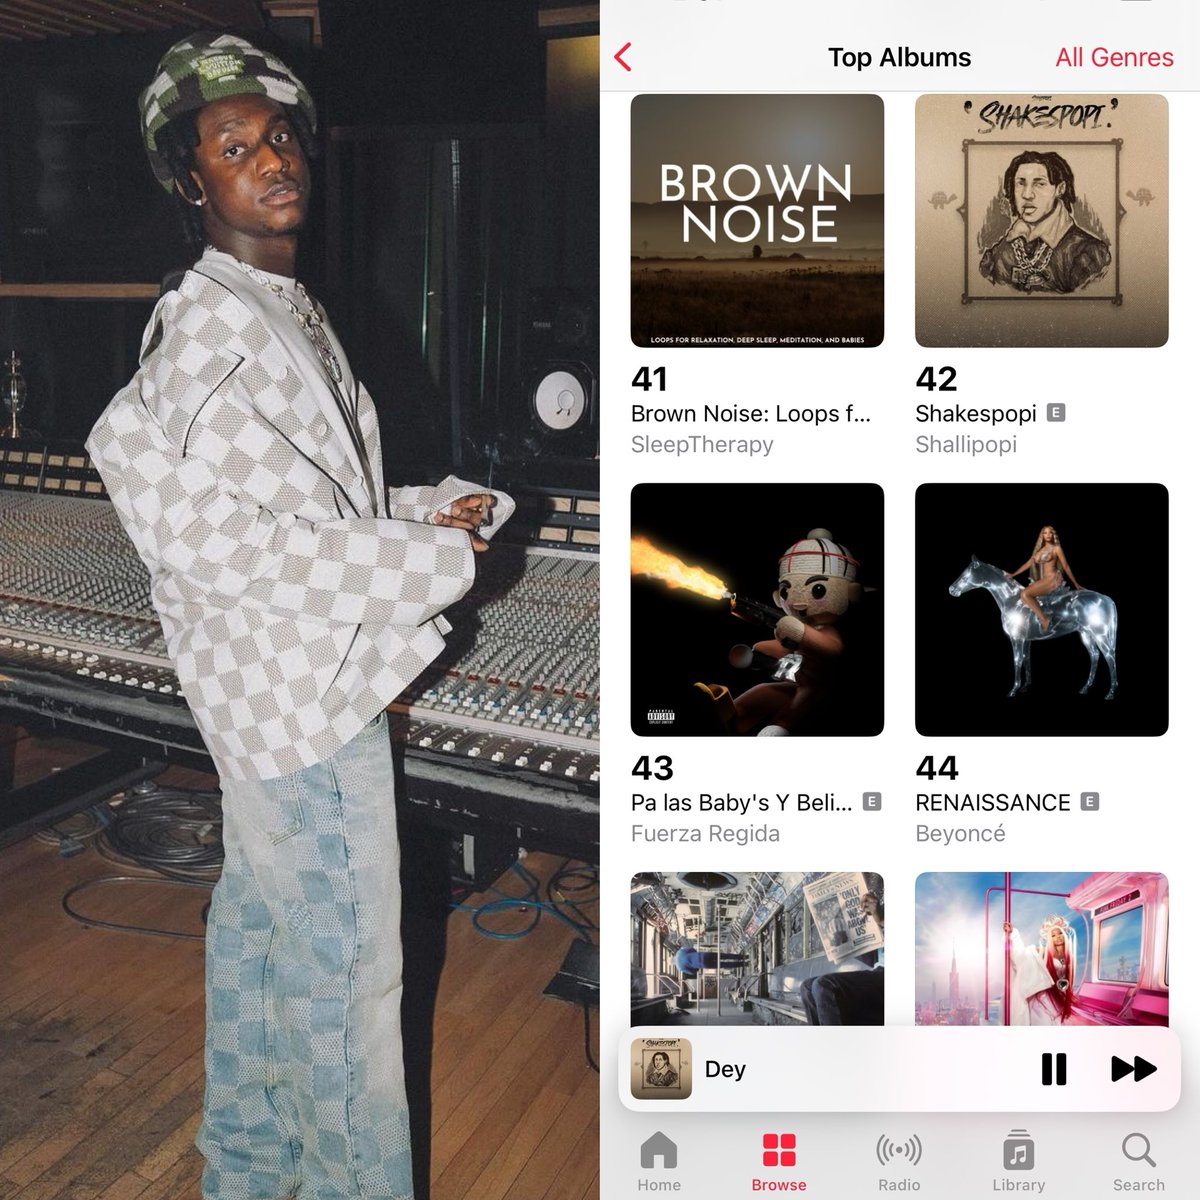 • Shallipopi’s album is in the top 50 on US Apple Music, currently at number 42.